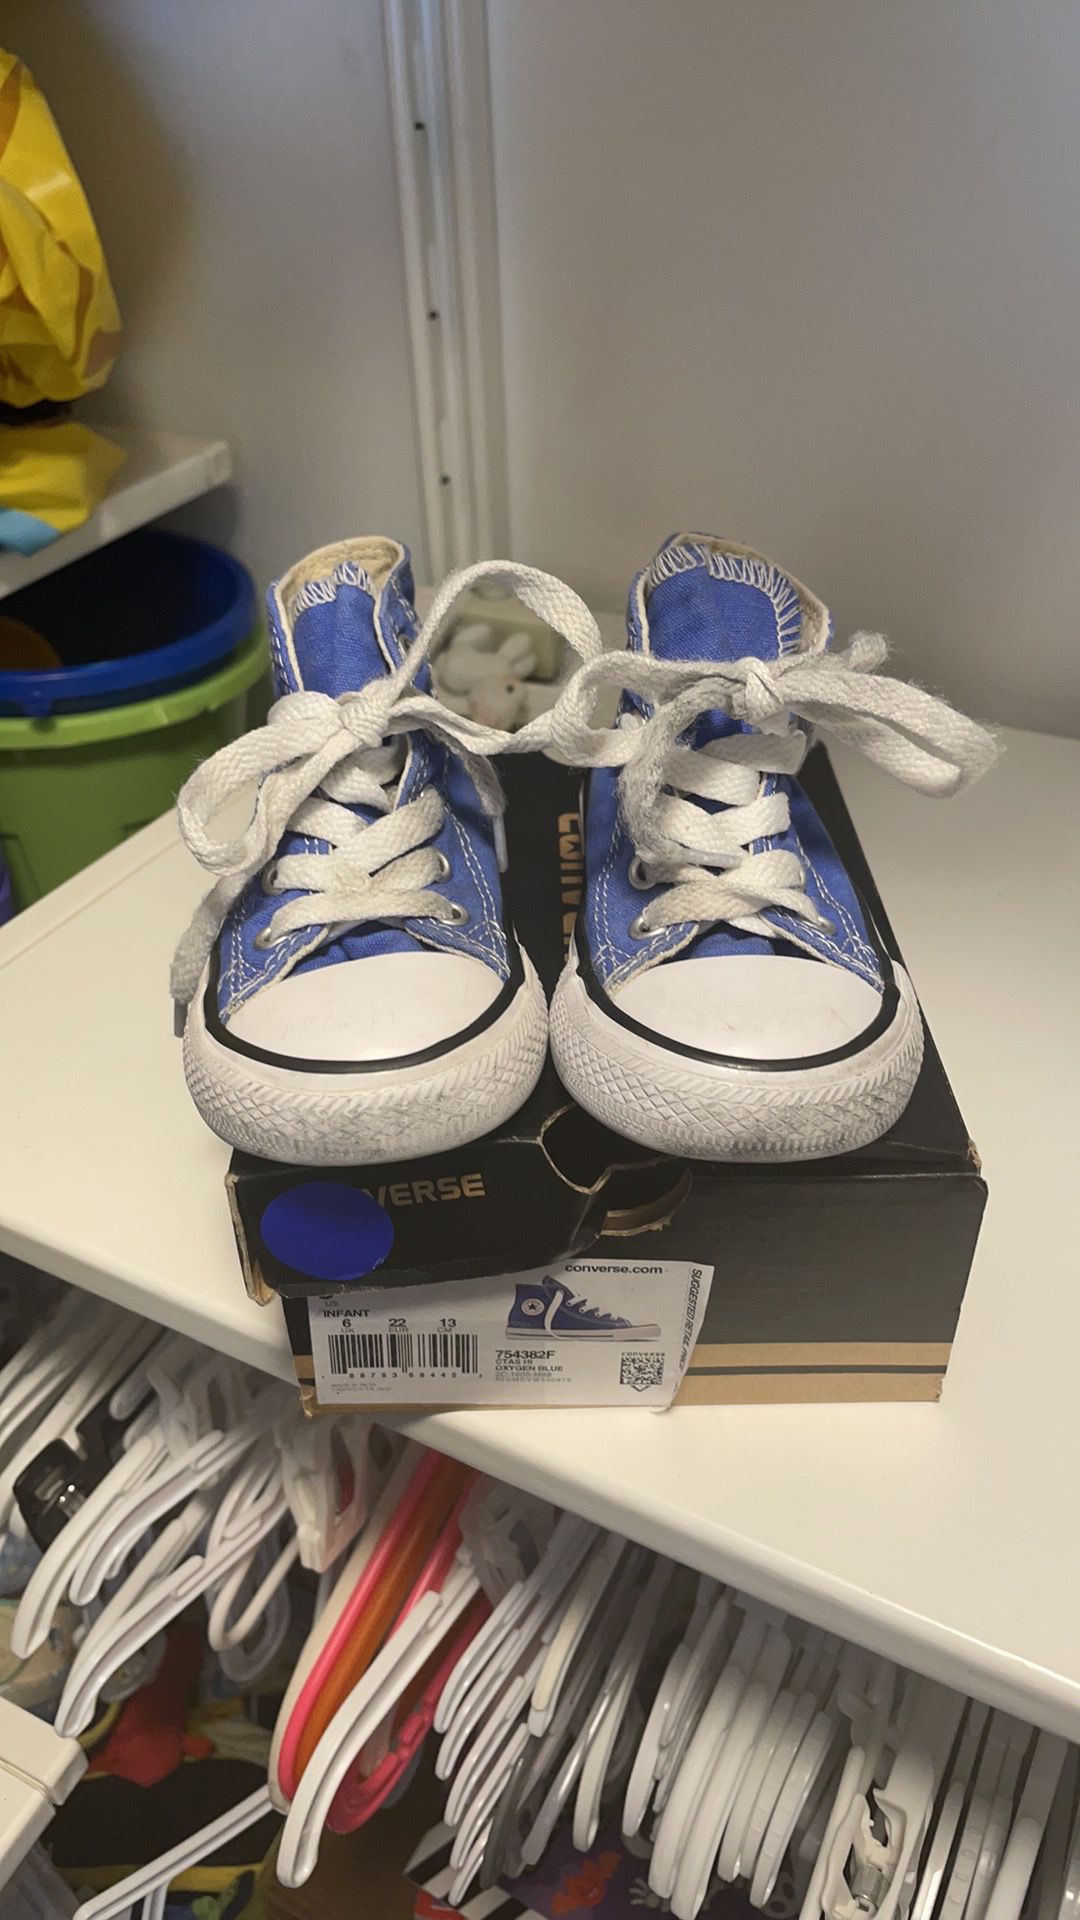 Converse Chuck Taylor High Tops Infant Baby Toddler 6